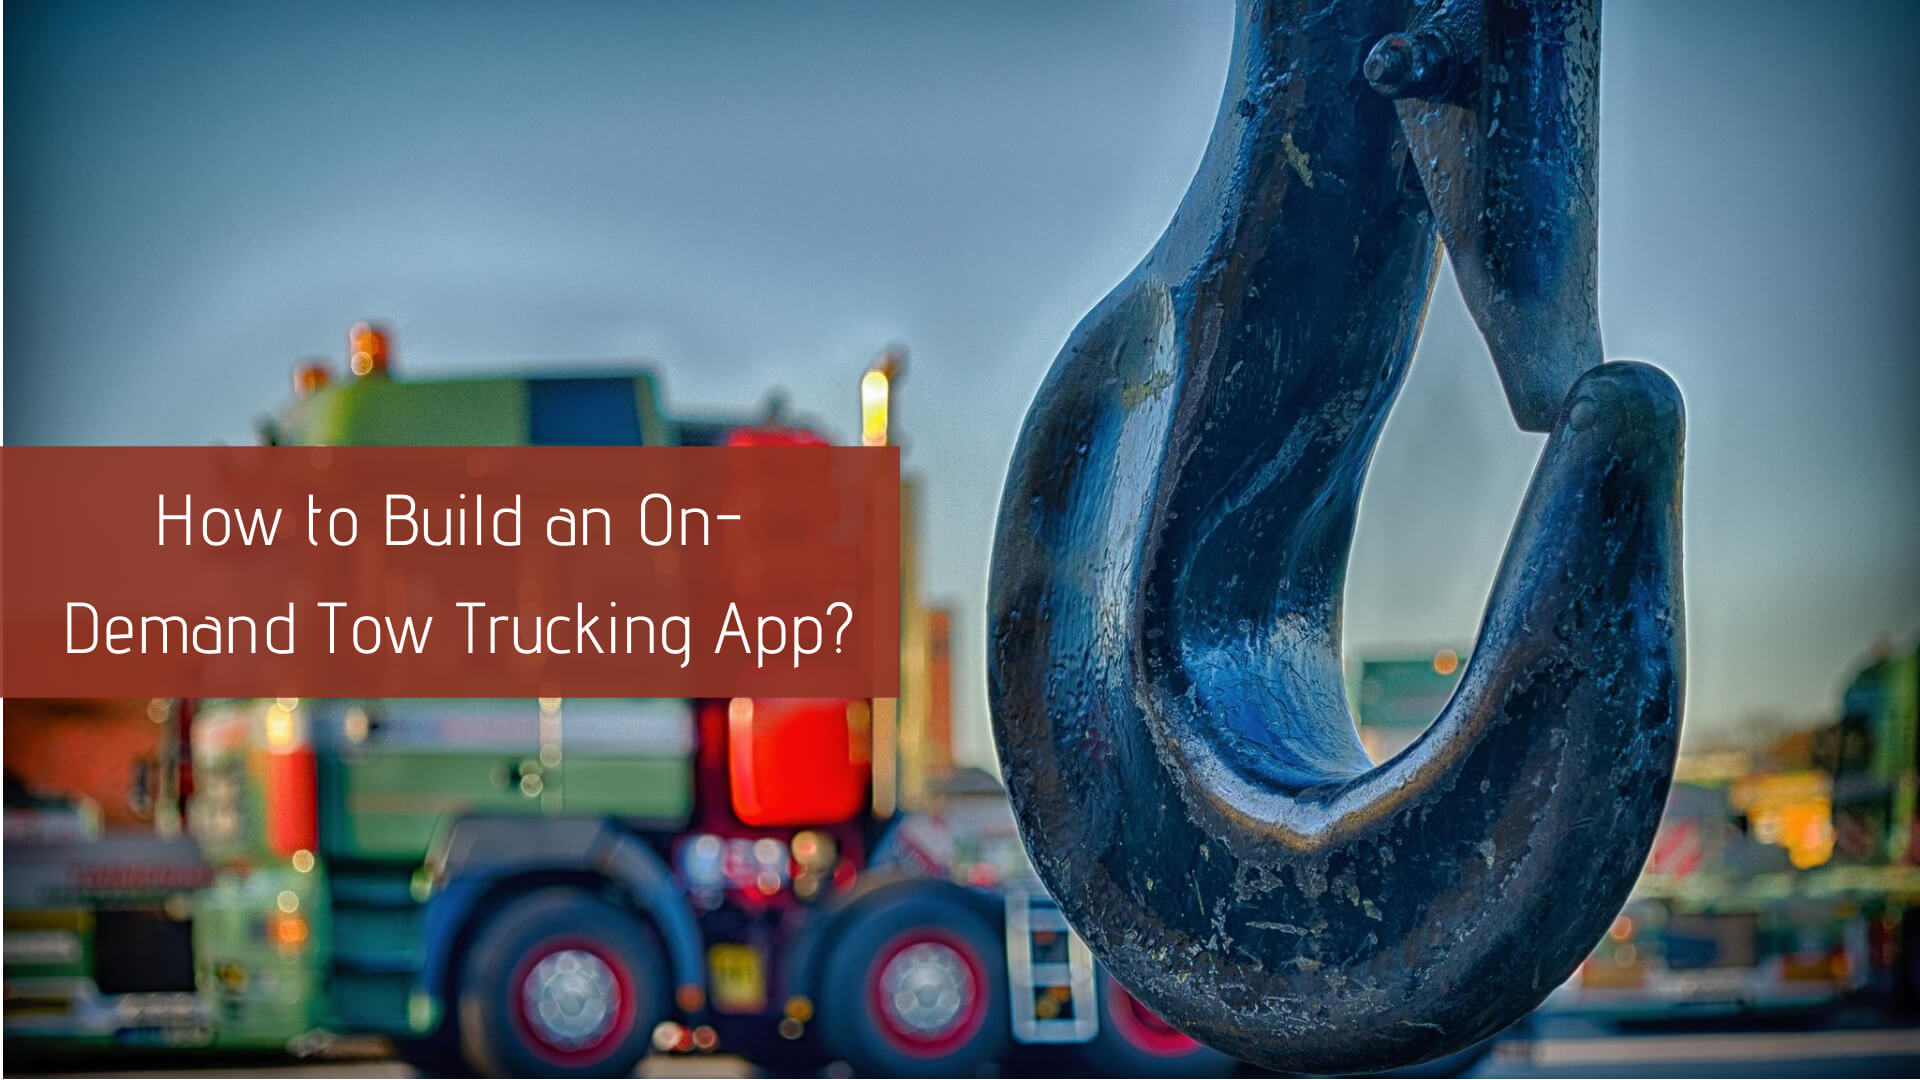 How to Build an On-Demand Tow Trucking App?